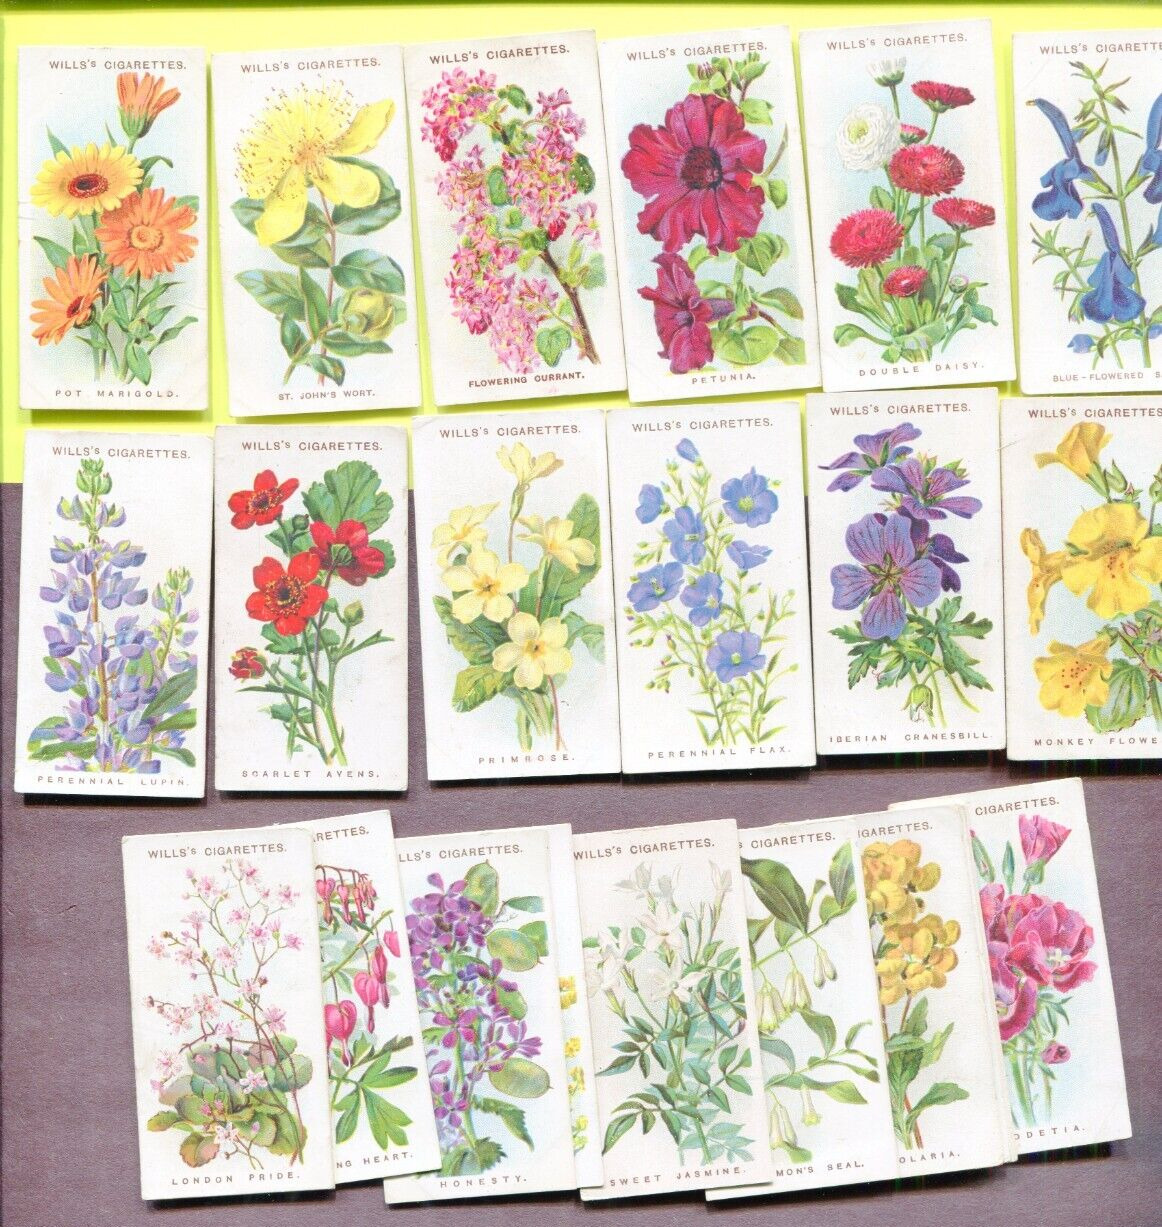 1913 WILLS CIGARETTES 2ND SERIES OLD ENGLISH GARDEN FLOWERS 25 TOBACCO CARD LOT